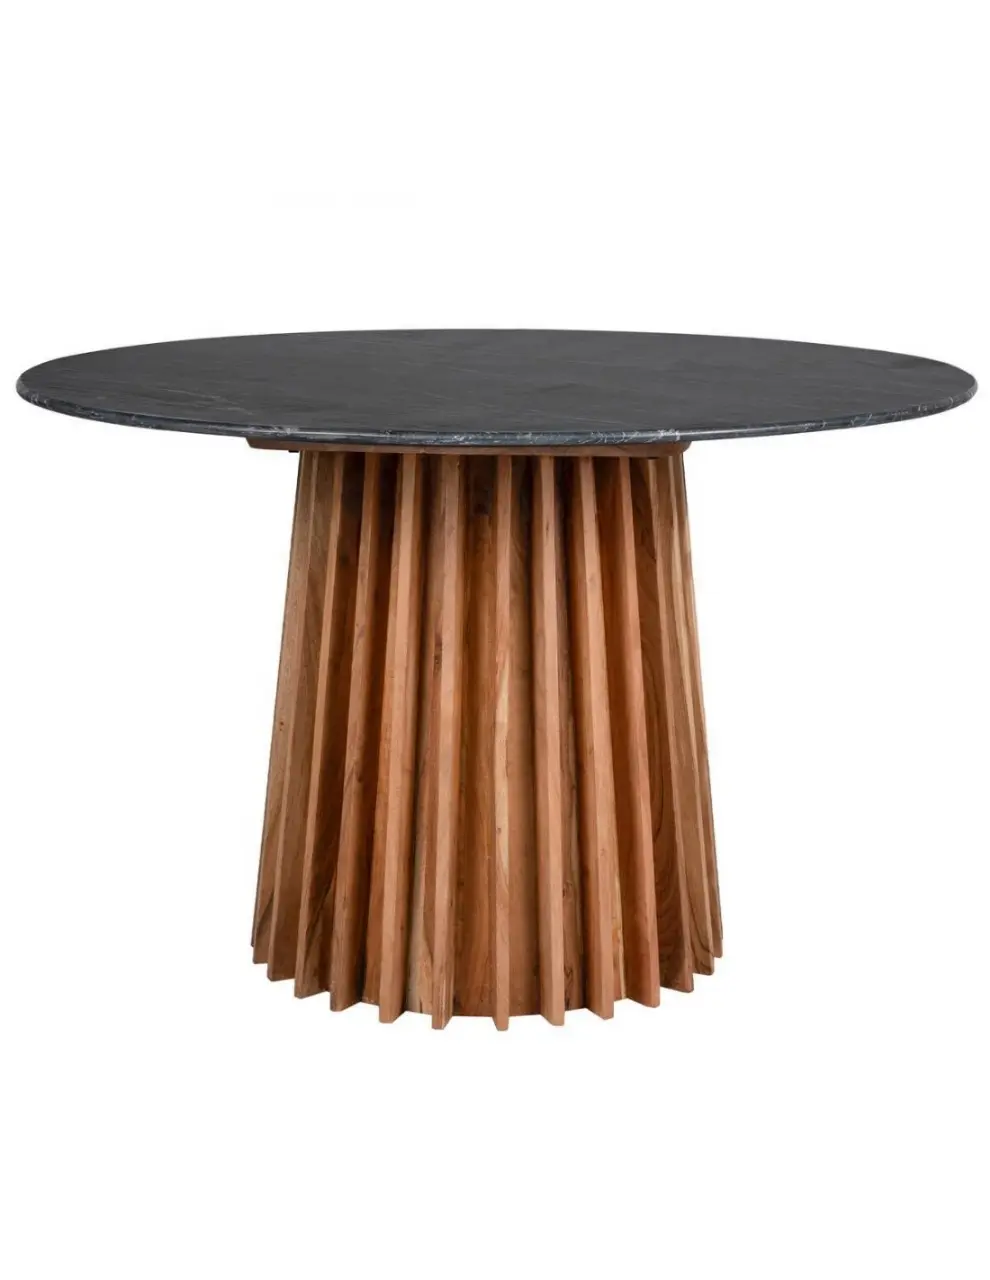 High quality export low round coffee table best selling product modern contemporary designs affordable price direct factory